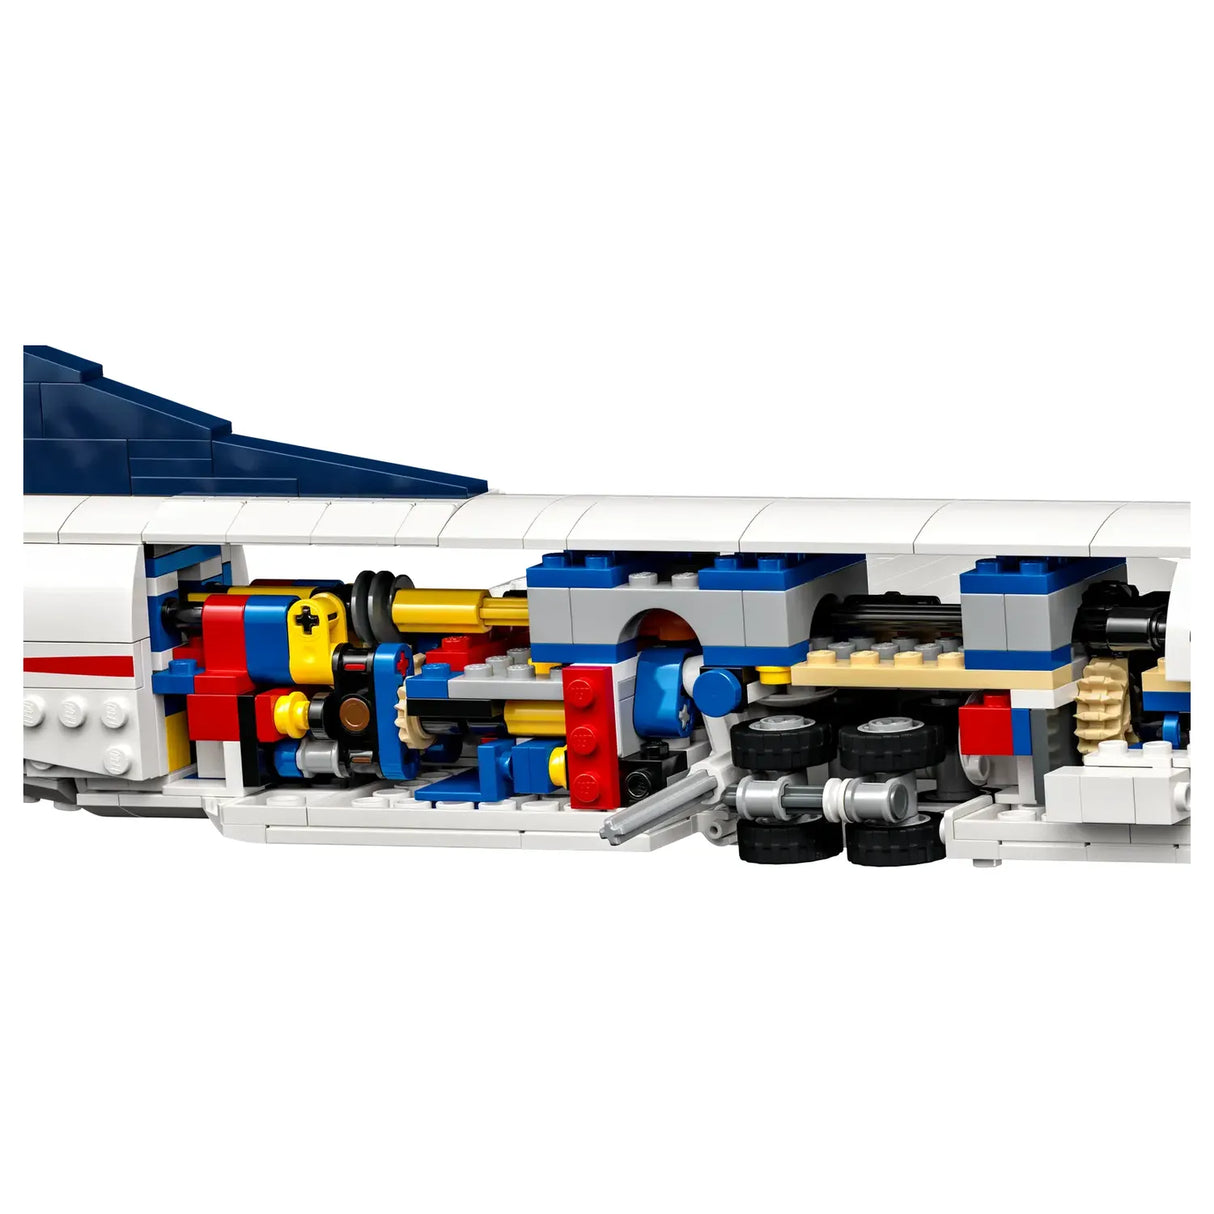 LEGO® 10318 Concorde LEGO Prize Draw Competitions